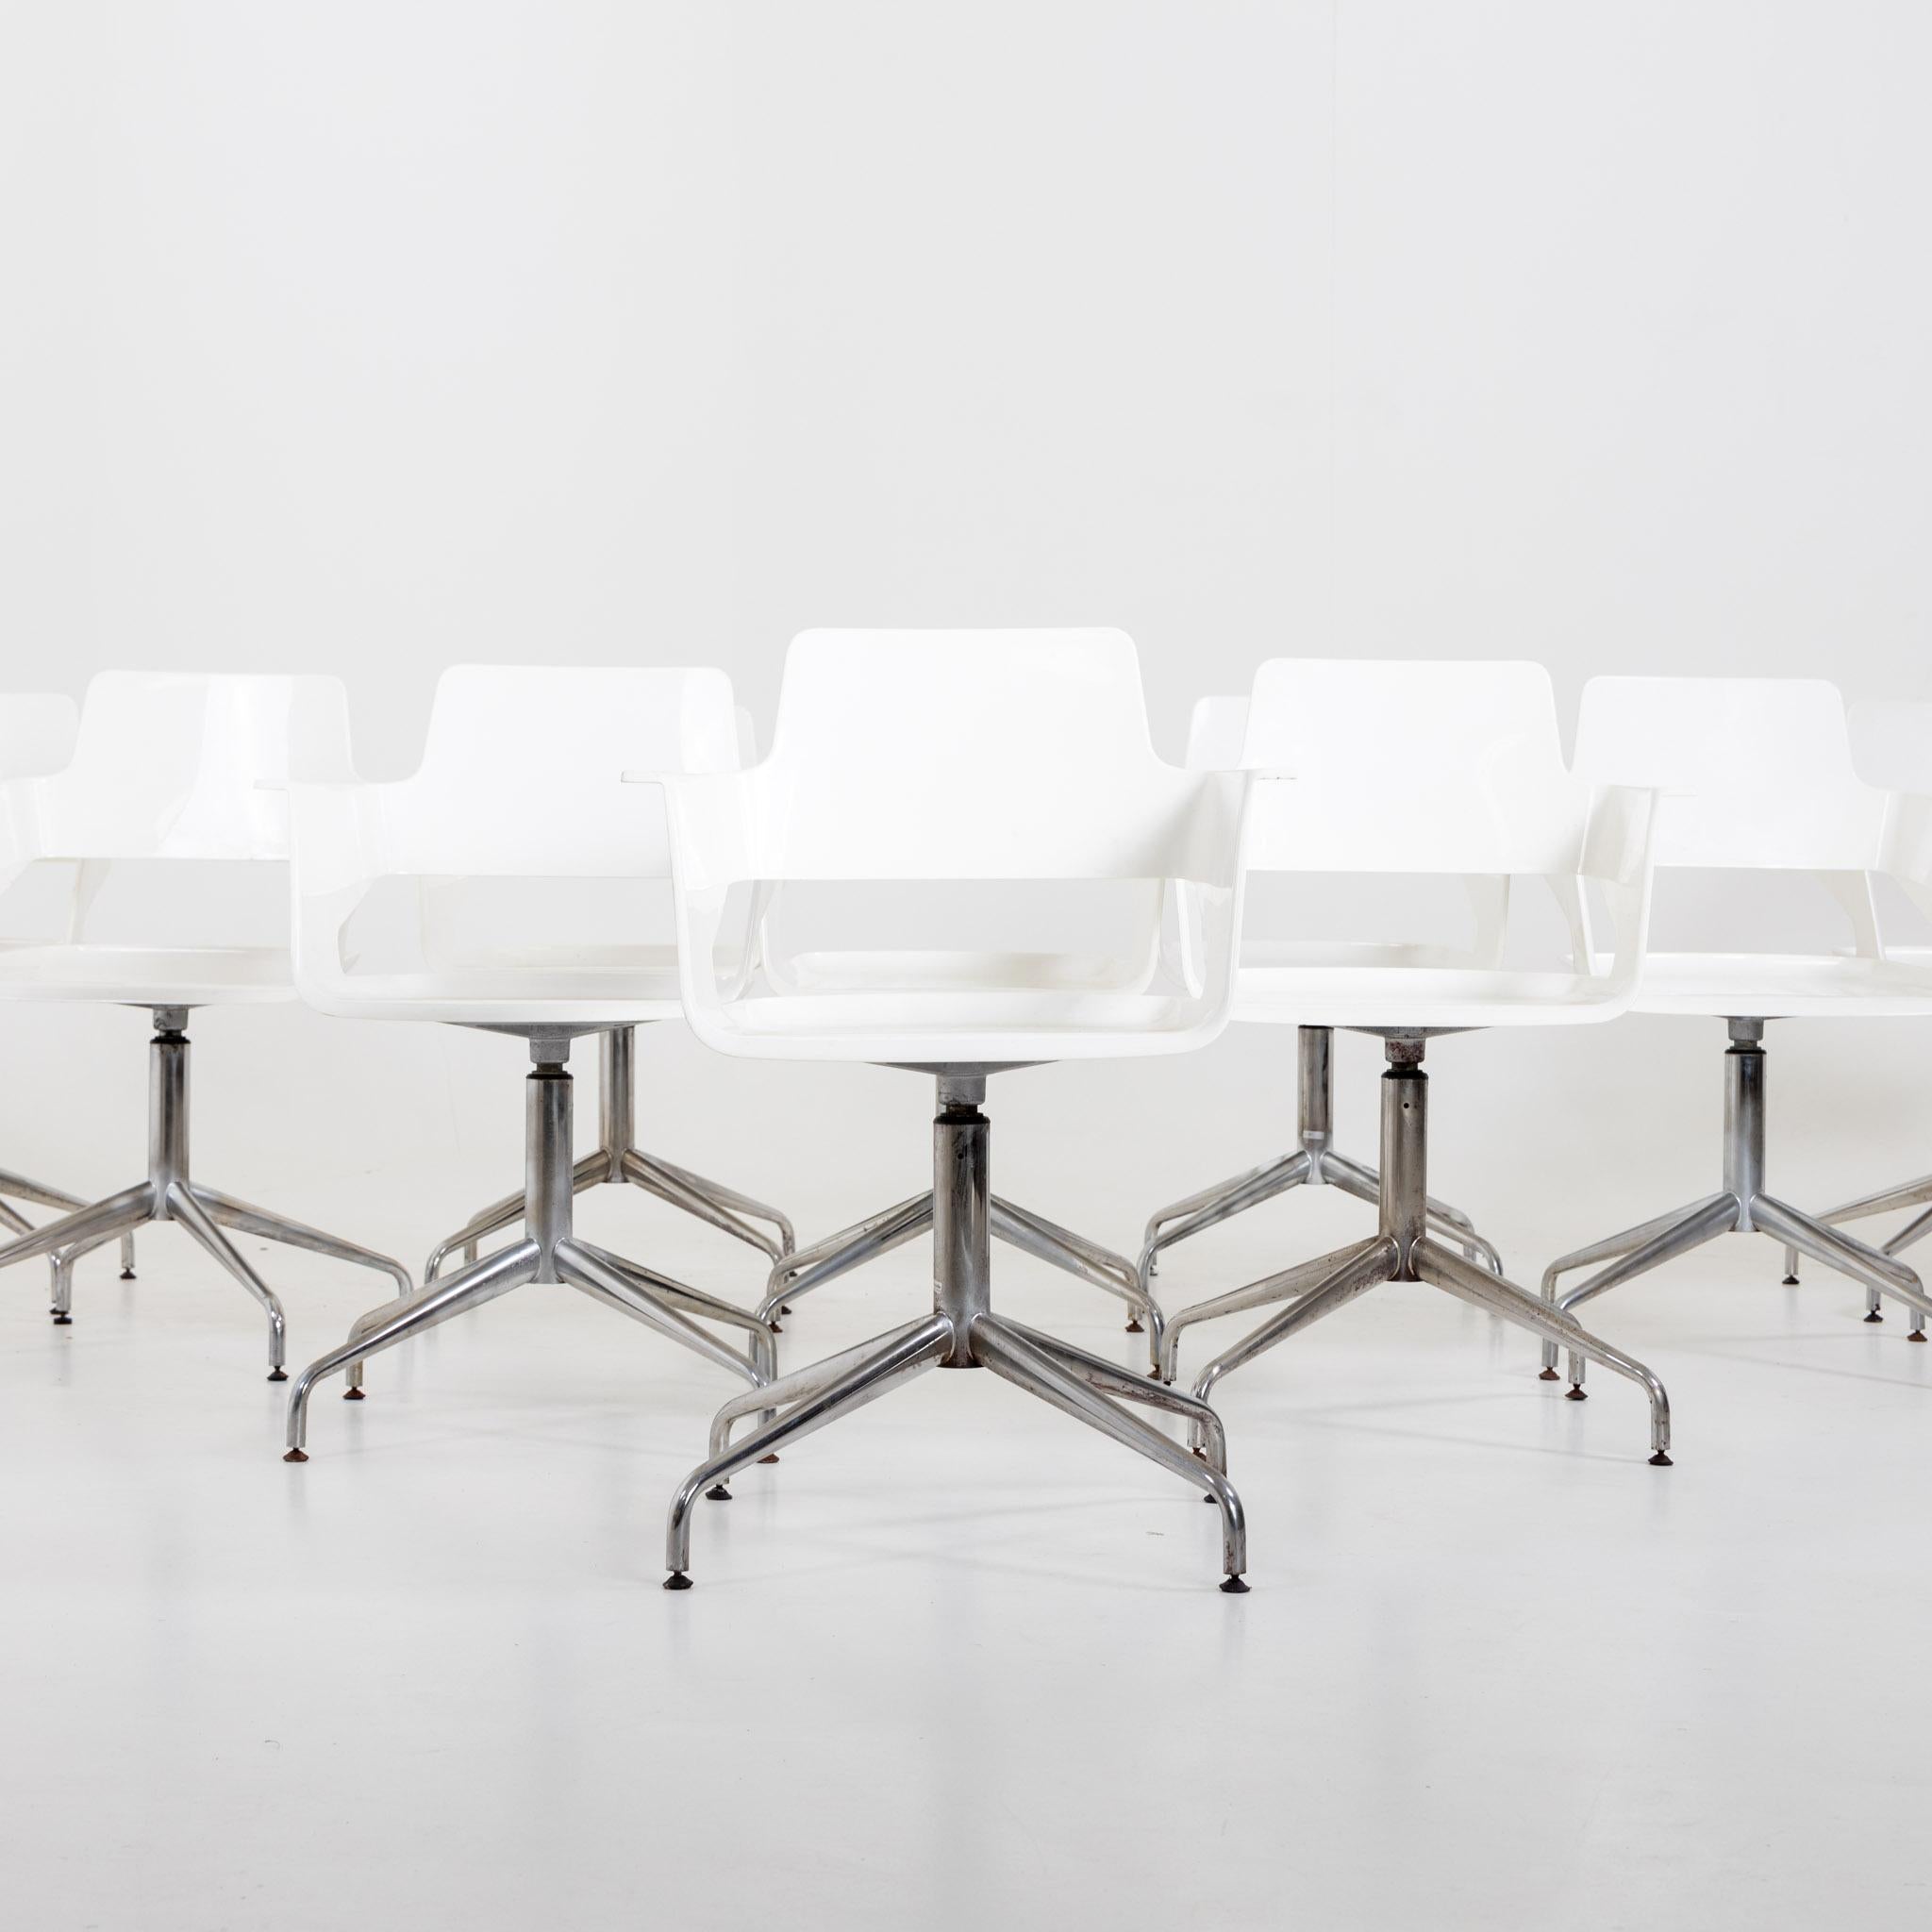 Set of ten office chairs on metal legs and white seat shells with armrests. The chairs feature a modern design with sleek metal legs and ergonomic white seat shells, providing both style and comfort. The inclusion of armrests adds an extra layer of